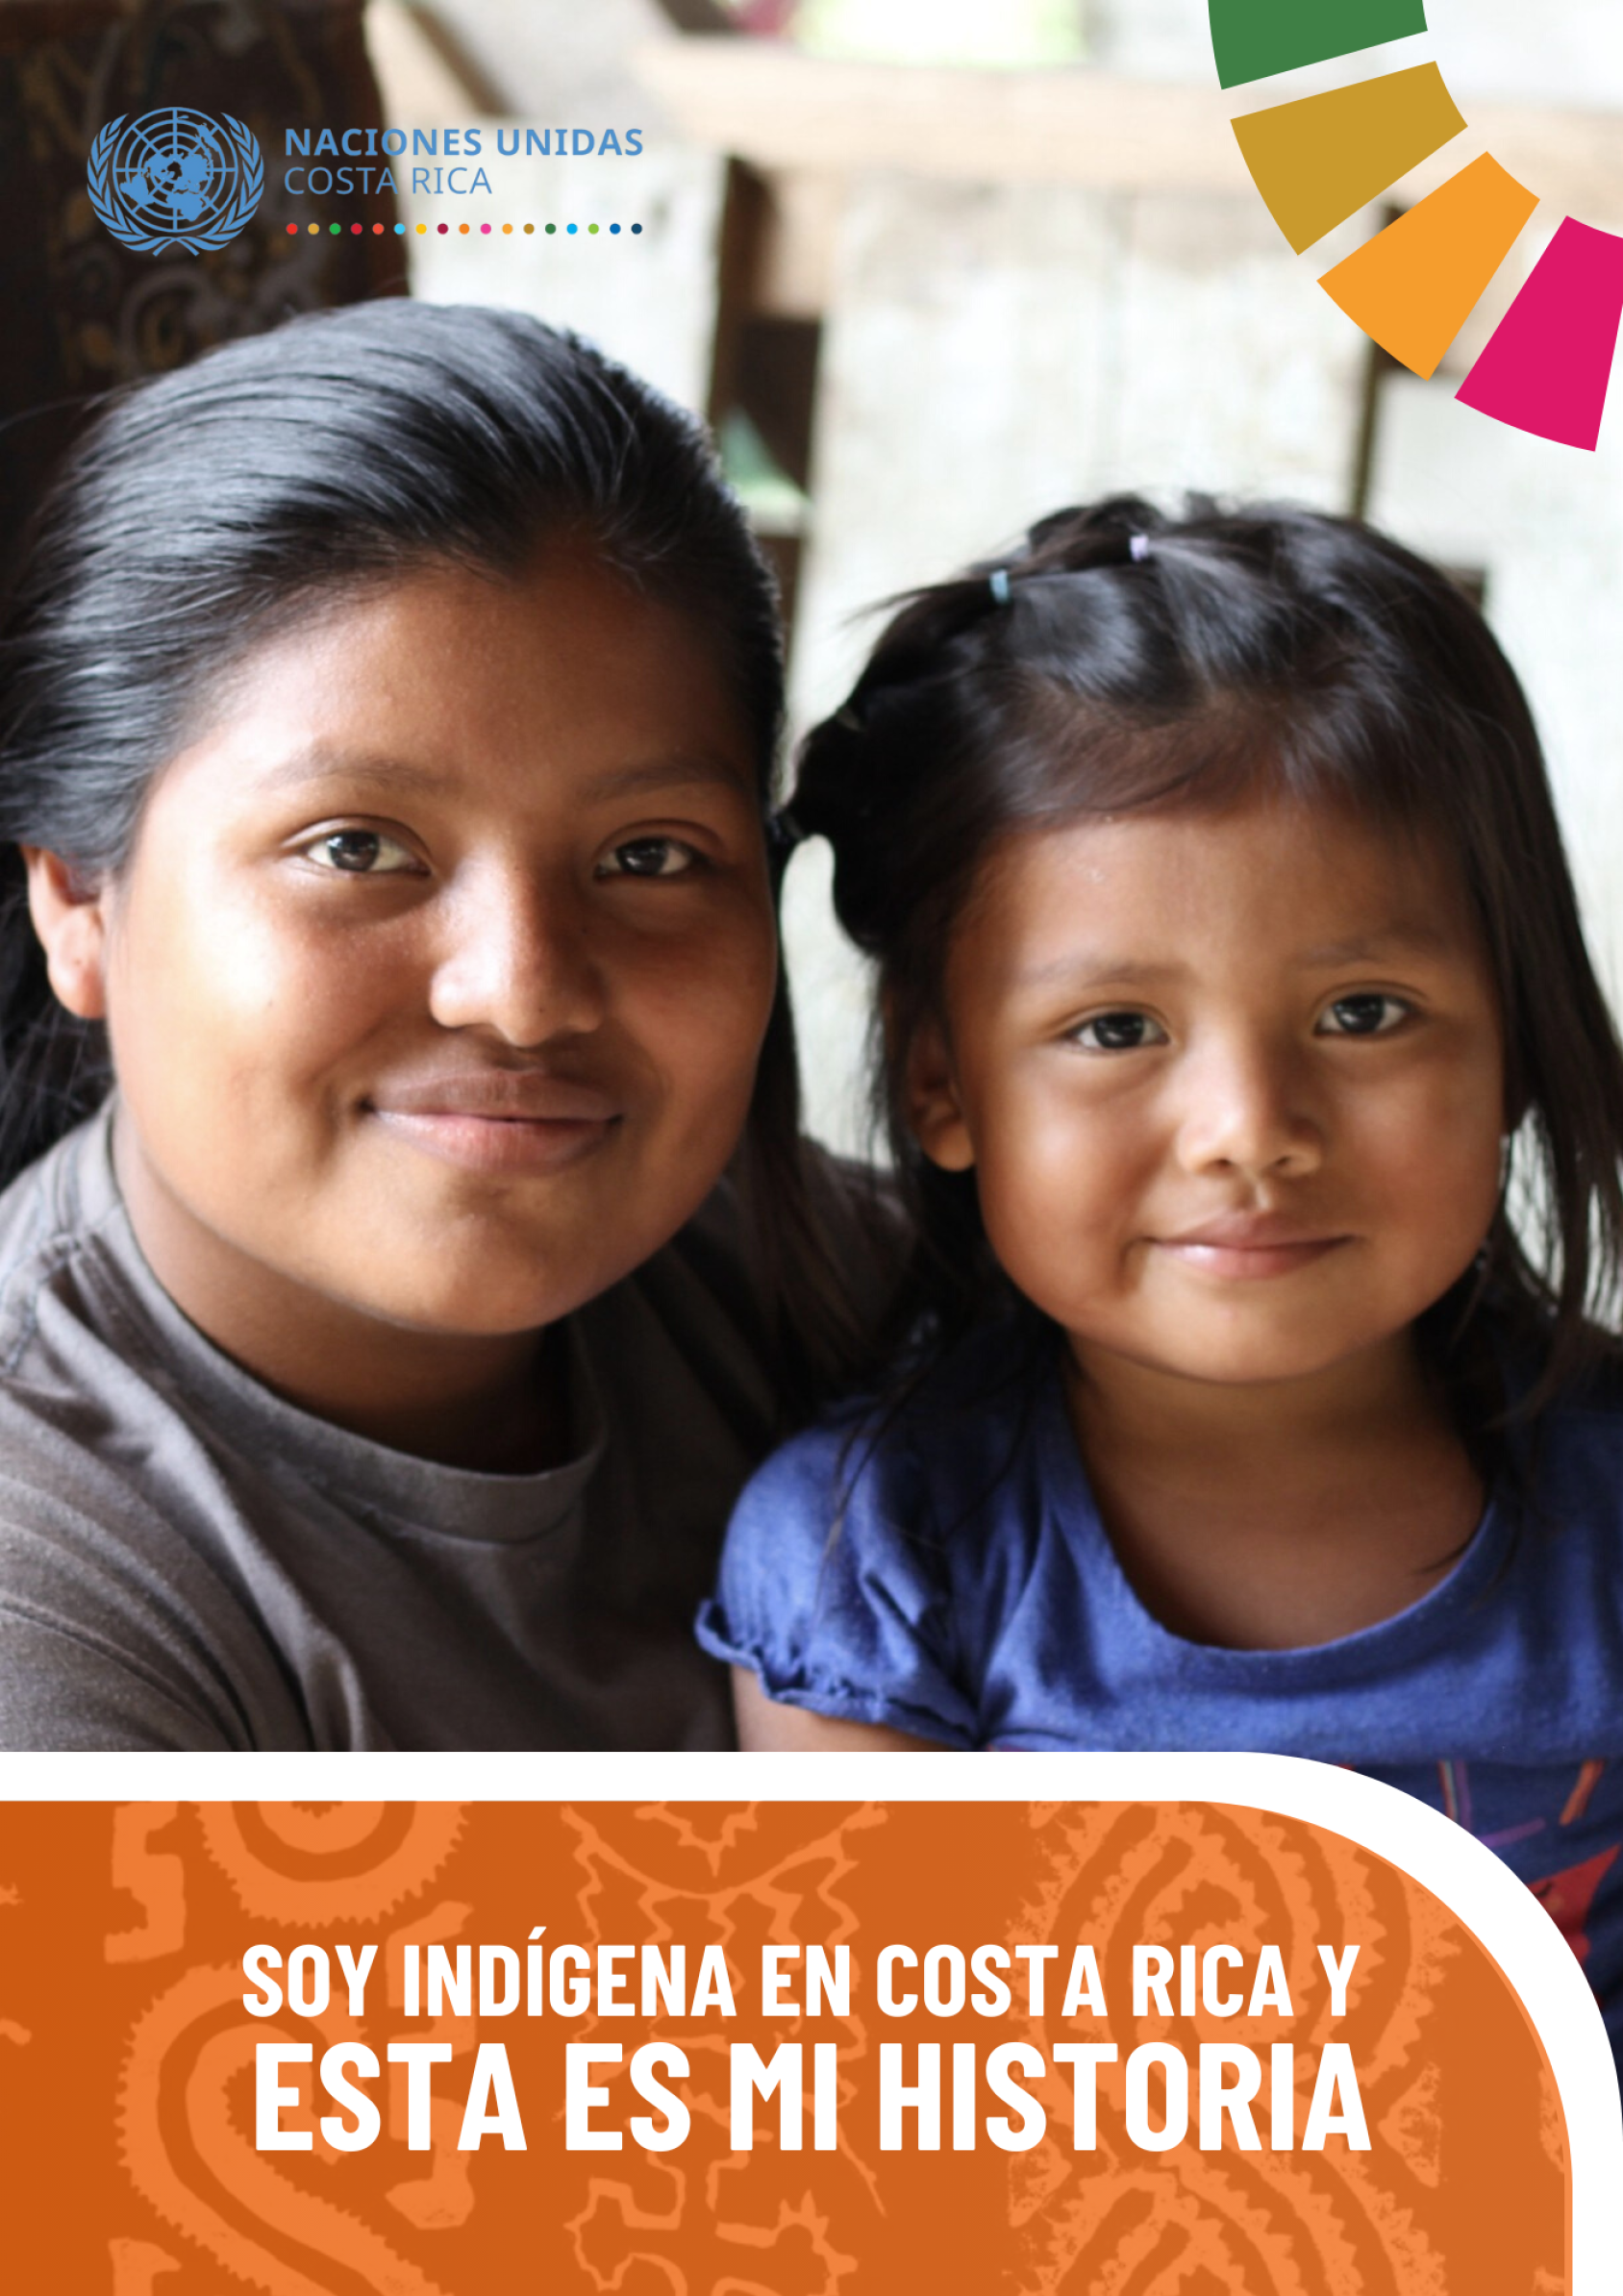 Portrait of a woman and a little girl looking with determination and joy at the camera. This image is the cover of the book "I am indigenous in Costa Rica and this is my story" edited by the United Nations in Costa Rica.